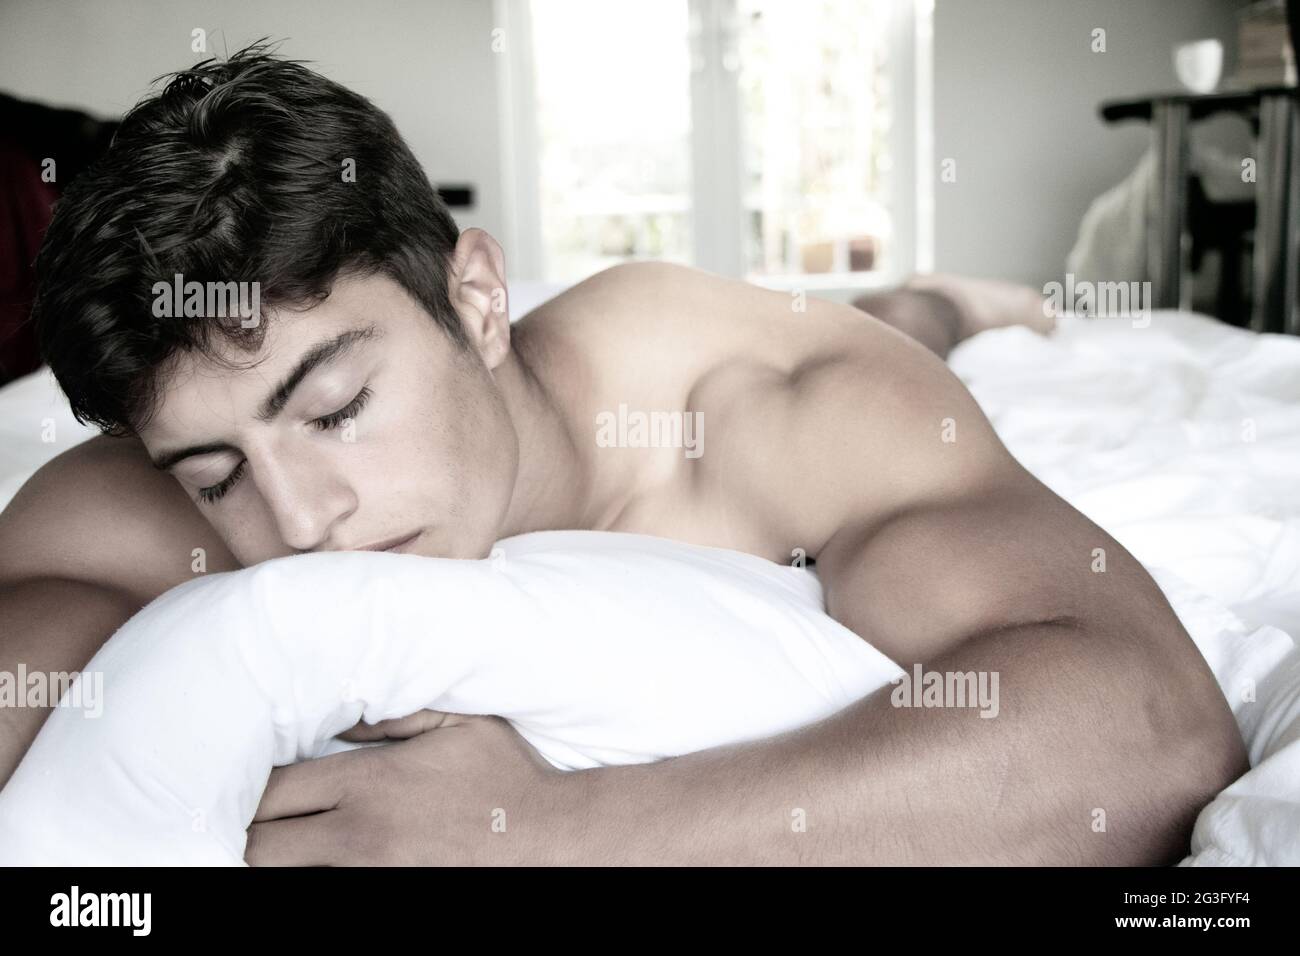 Sexy, naked muscular man sleeping on bed Stock Photo